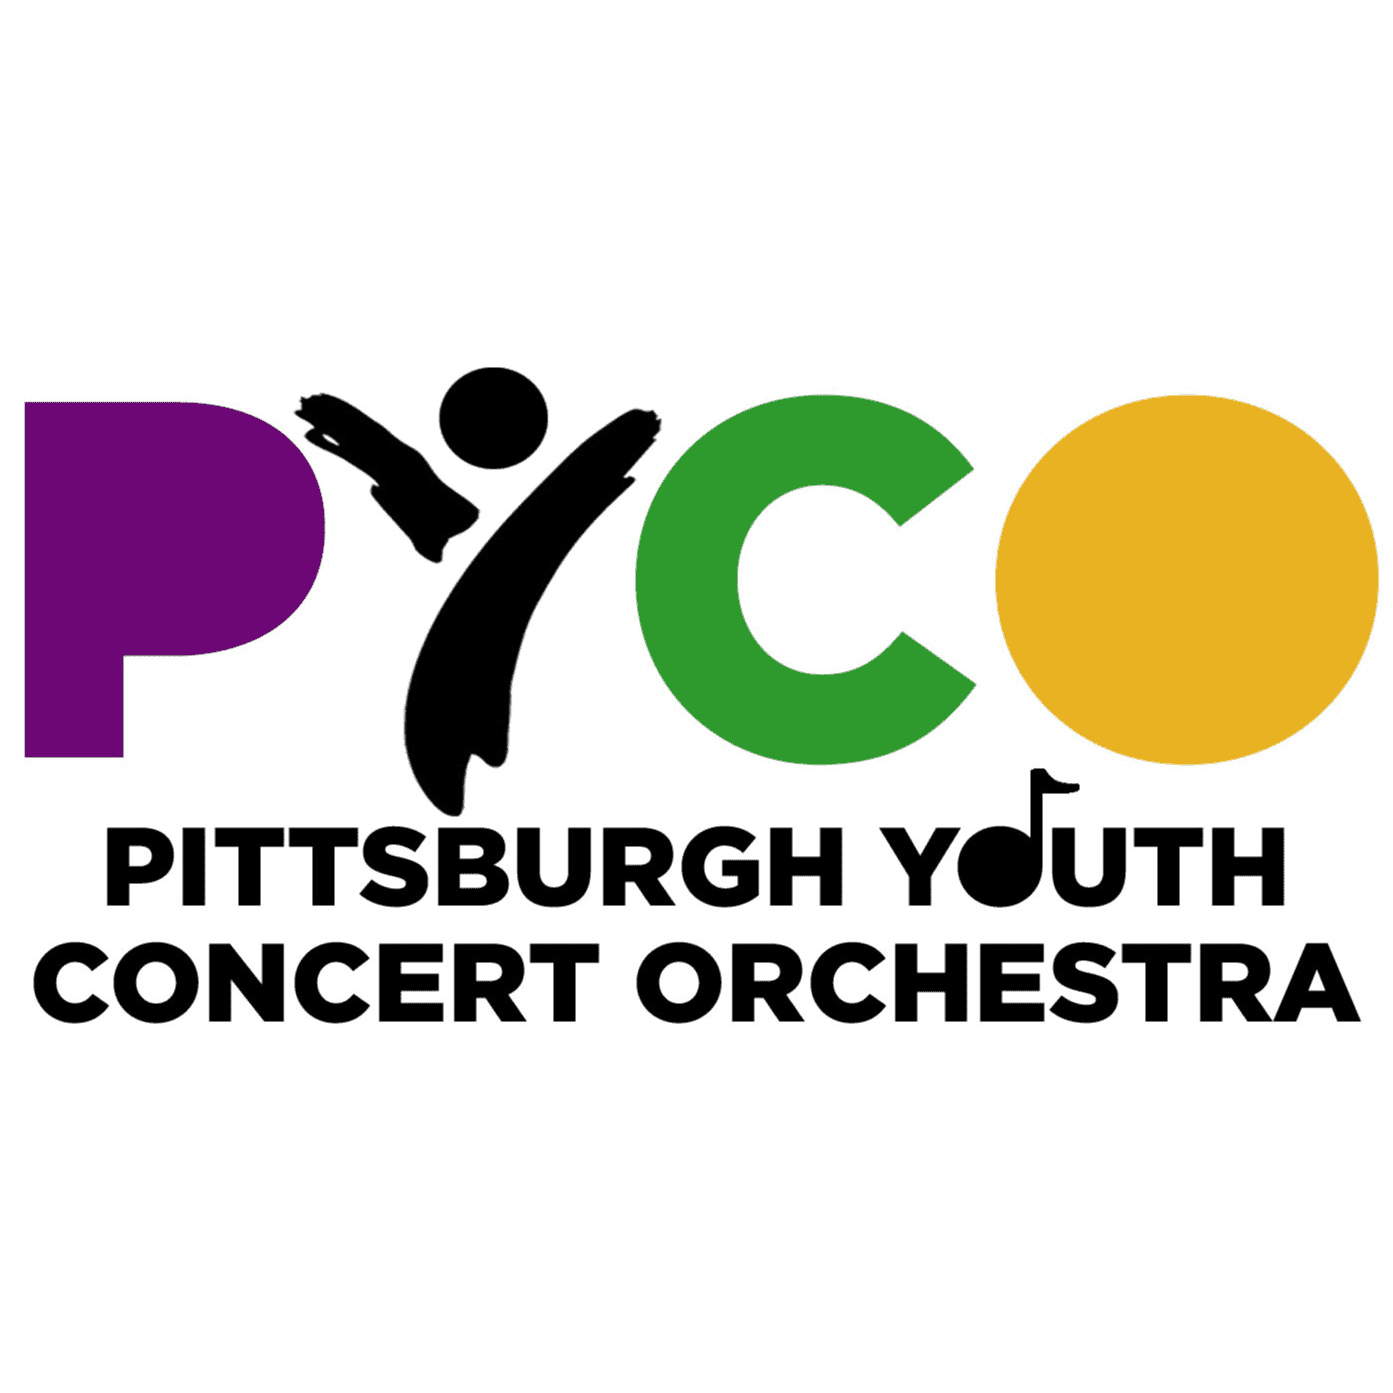 Pittsburgh Youth Concert Orchestra's Logo